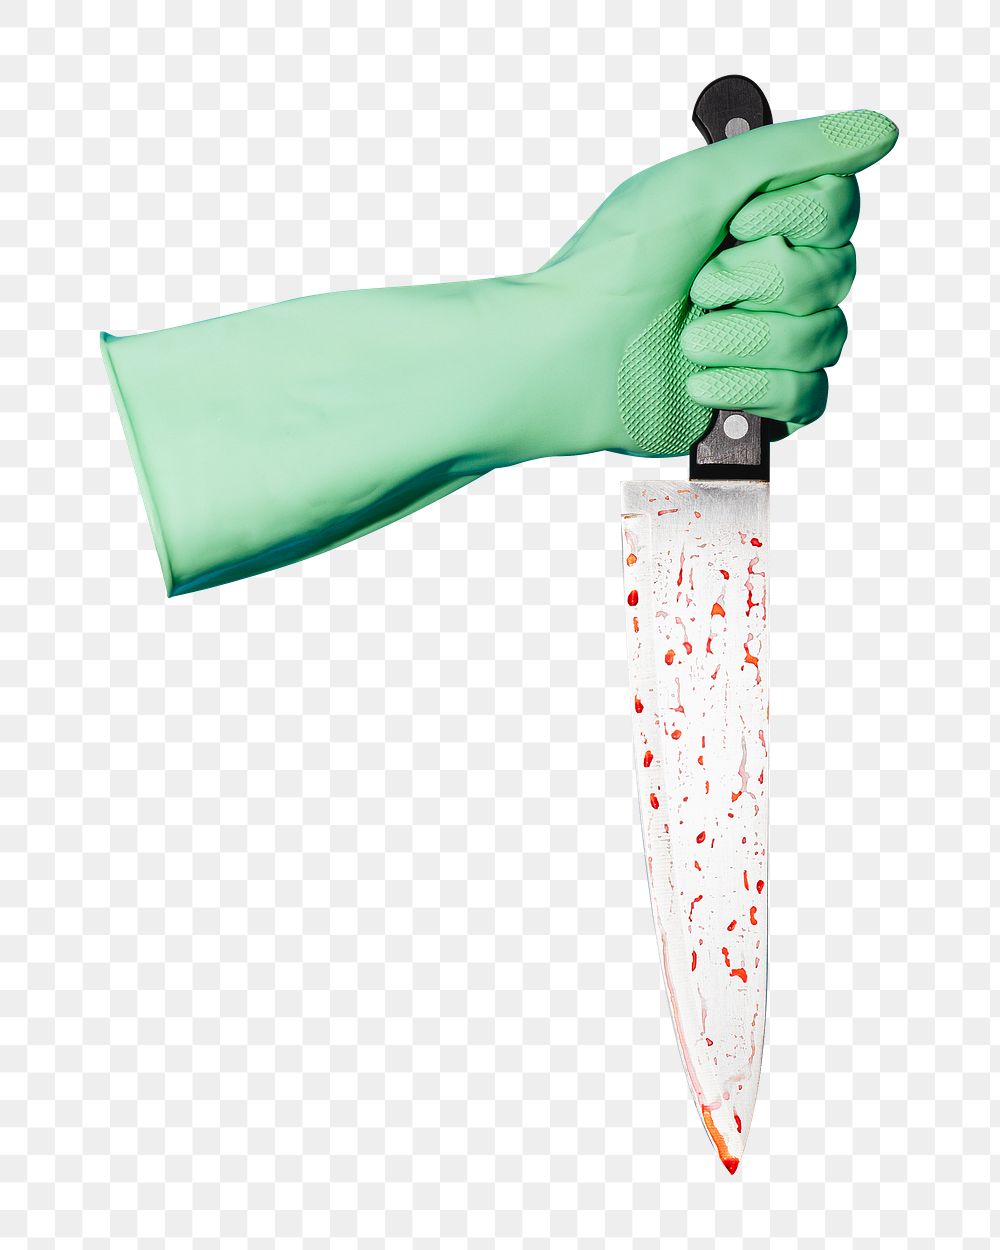 PNG hand in a glove holding a knife, collage element, transparent background